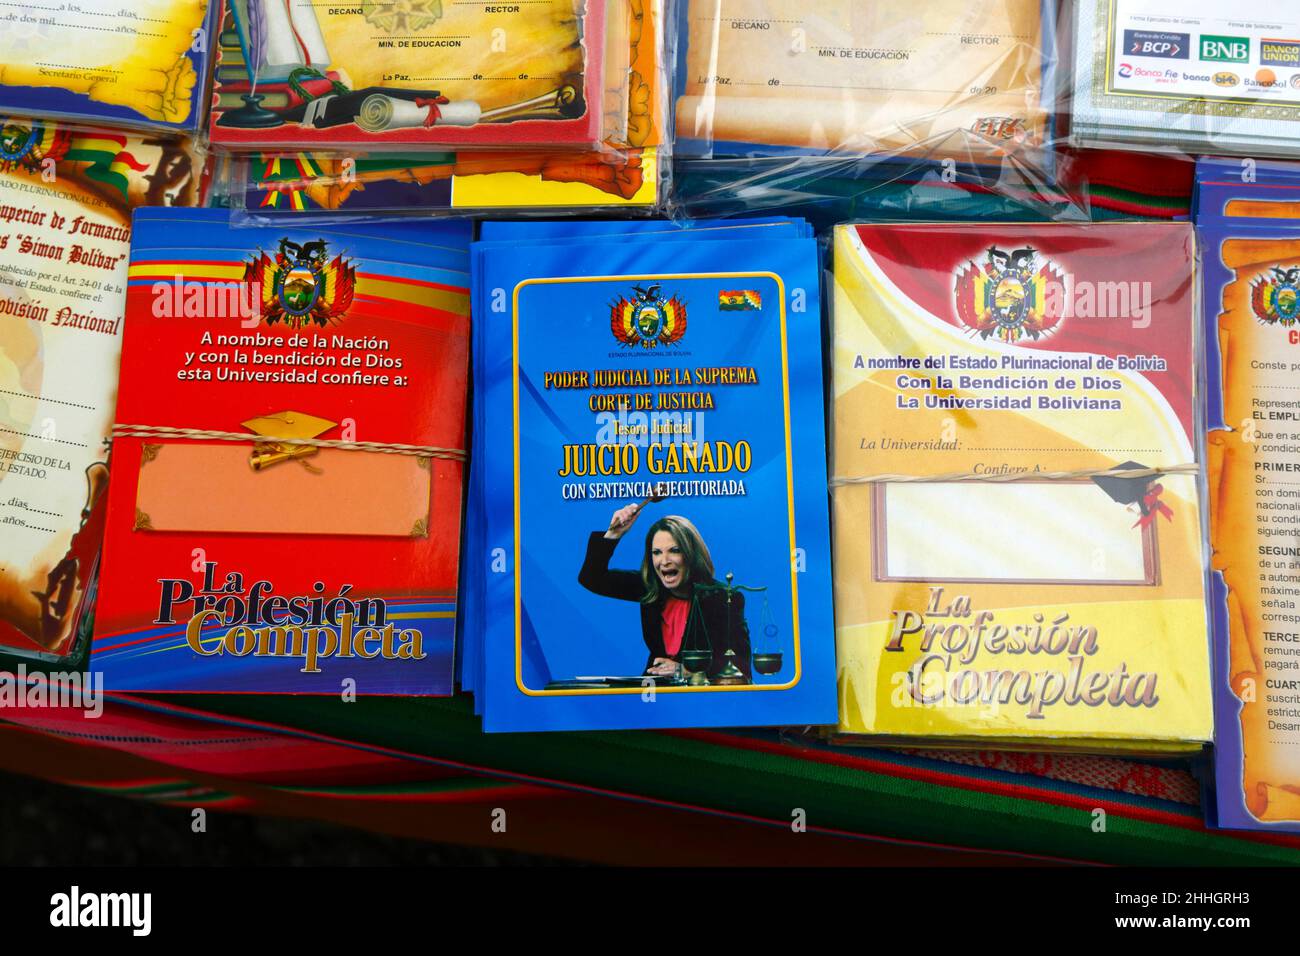 24th January 2022, La Paz, Bolivia: A verdict from the Supreme Court of Justice featuring Ana María Polo from the famous Telemundo TV series 'Caso Cerrado' ('Case Closed') and miniature certificates for sale at the Alasitas festival, which started today. Alasitas is a festival celebrated throughout the Bolivian altiplano, especially in La Paz. It has ancient origins - traditionally the Aymara people would perform rituals and offer miniatures to their gods, the idea being that these would then be received during the coming year. Stock Photo